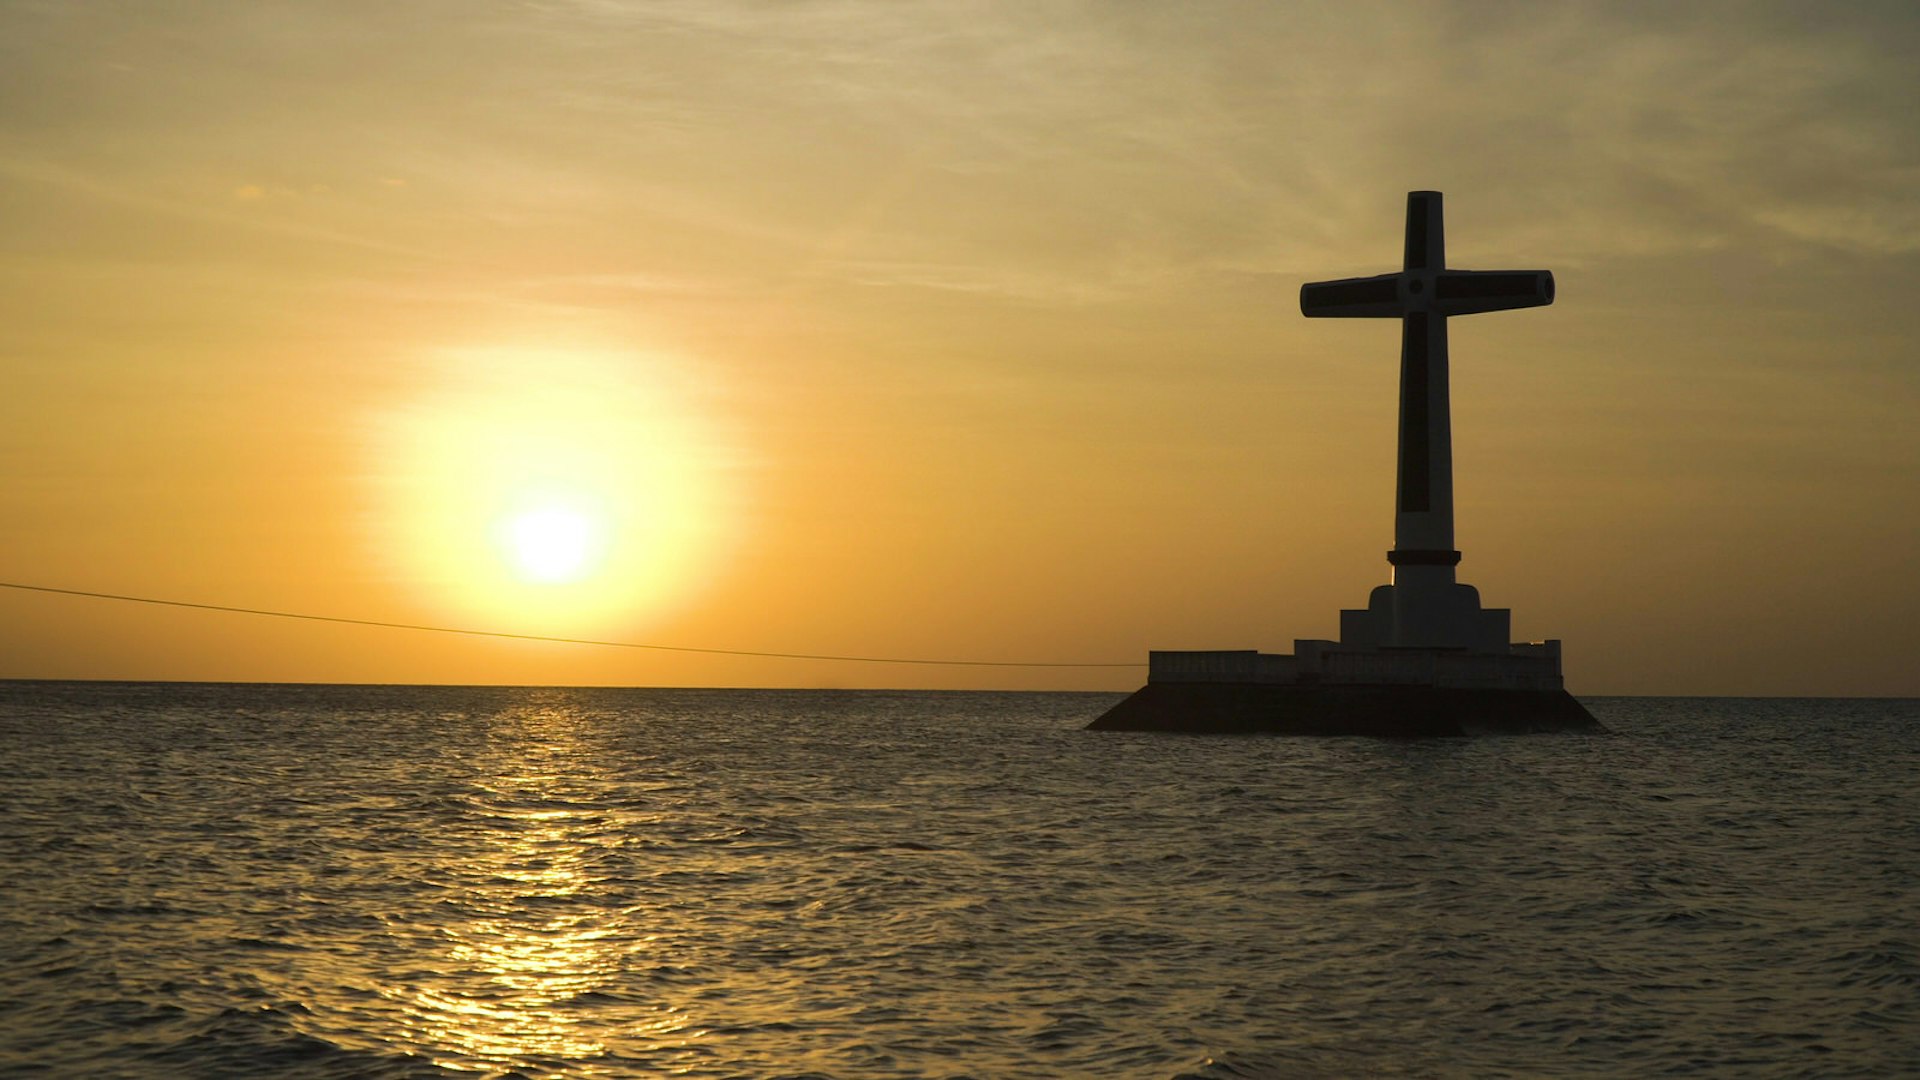 A cross juts out from the sea, marking the spot of Camiguin's Sunken Cemetry - one of the Philippines'most unique dive spots. The cross is a silhouette due to the sun setting in the background